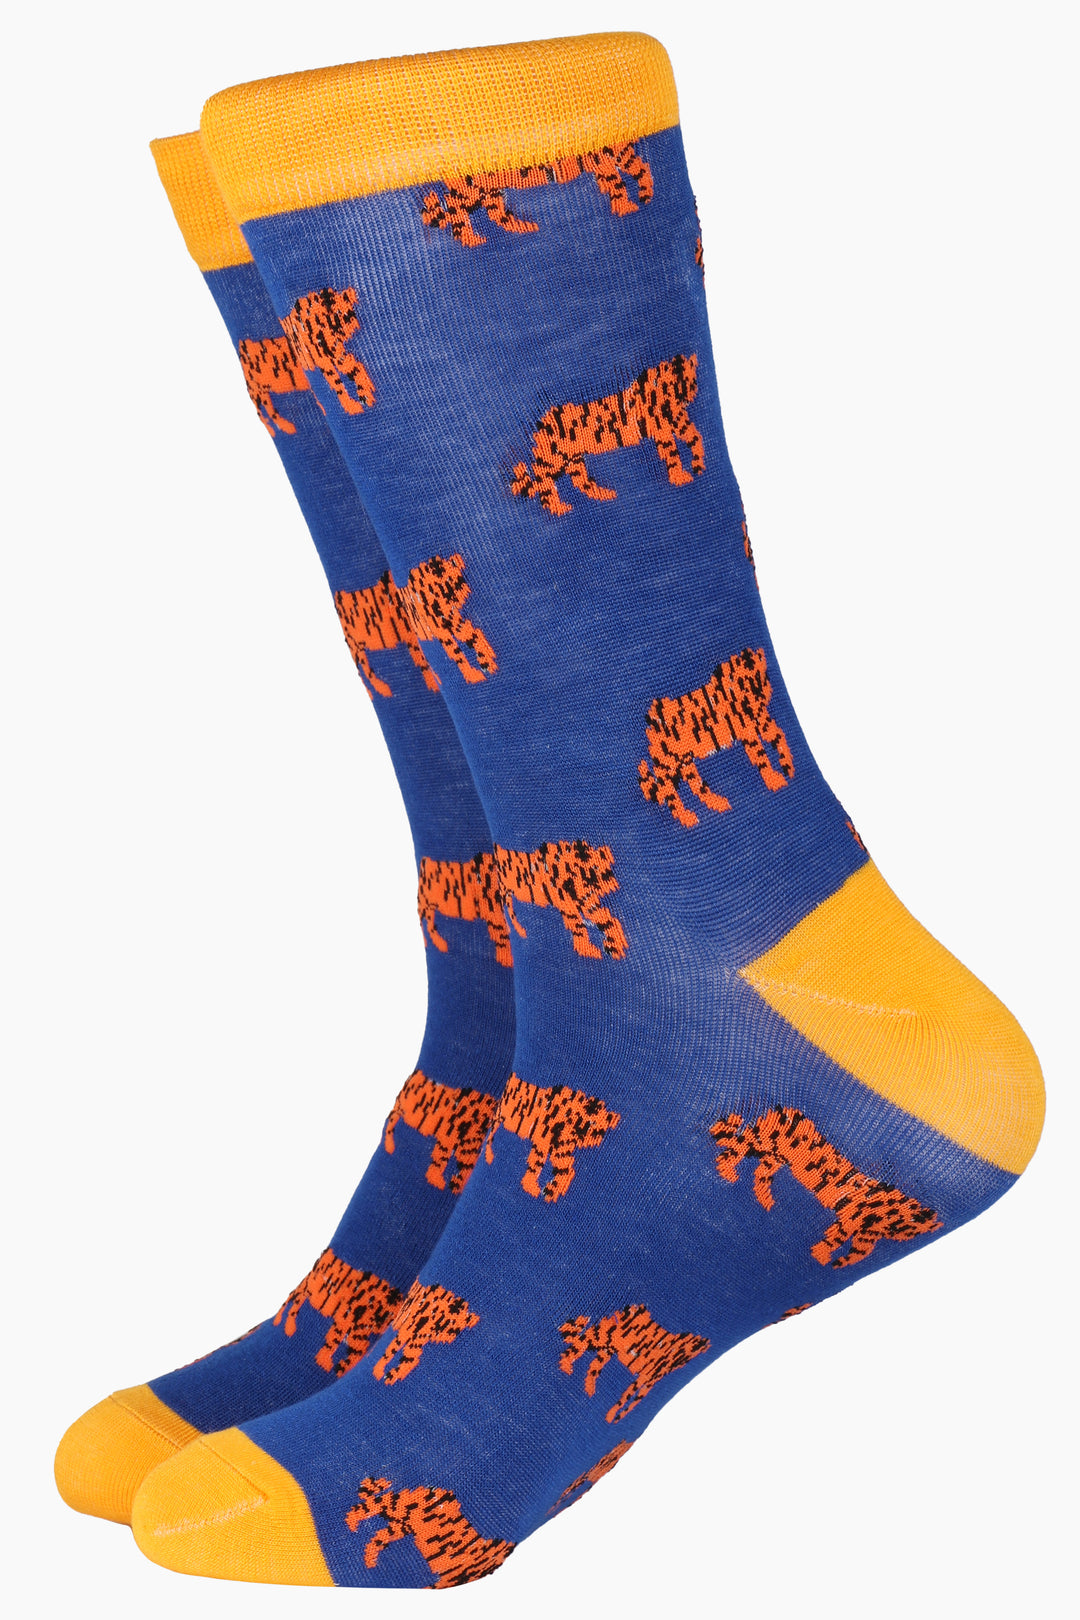 blue  bamboo socks with yellow toe, heel and cuff with an all over pattern of orange tigers